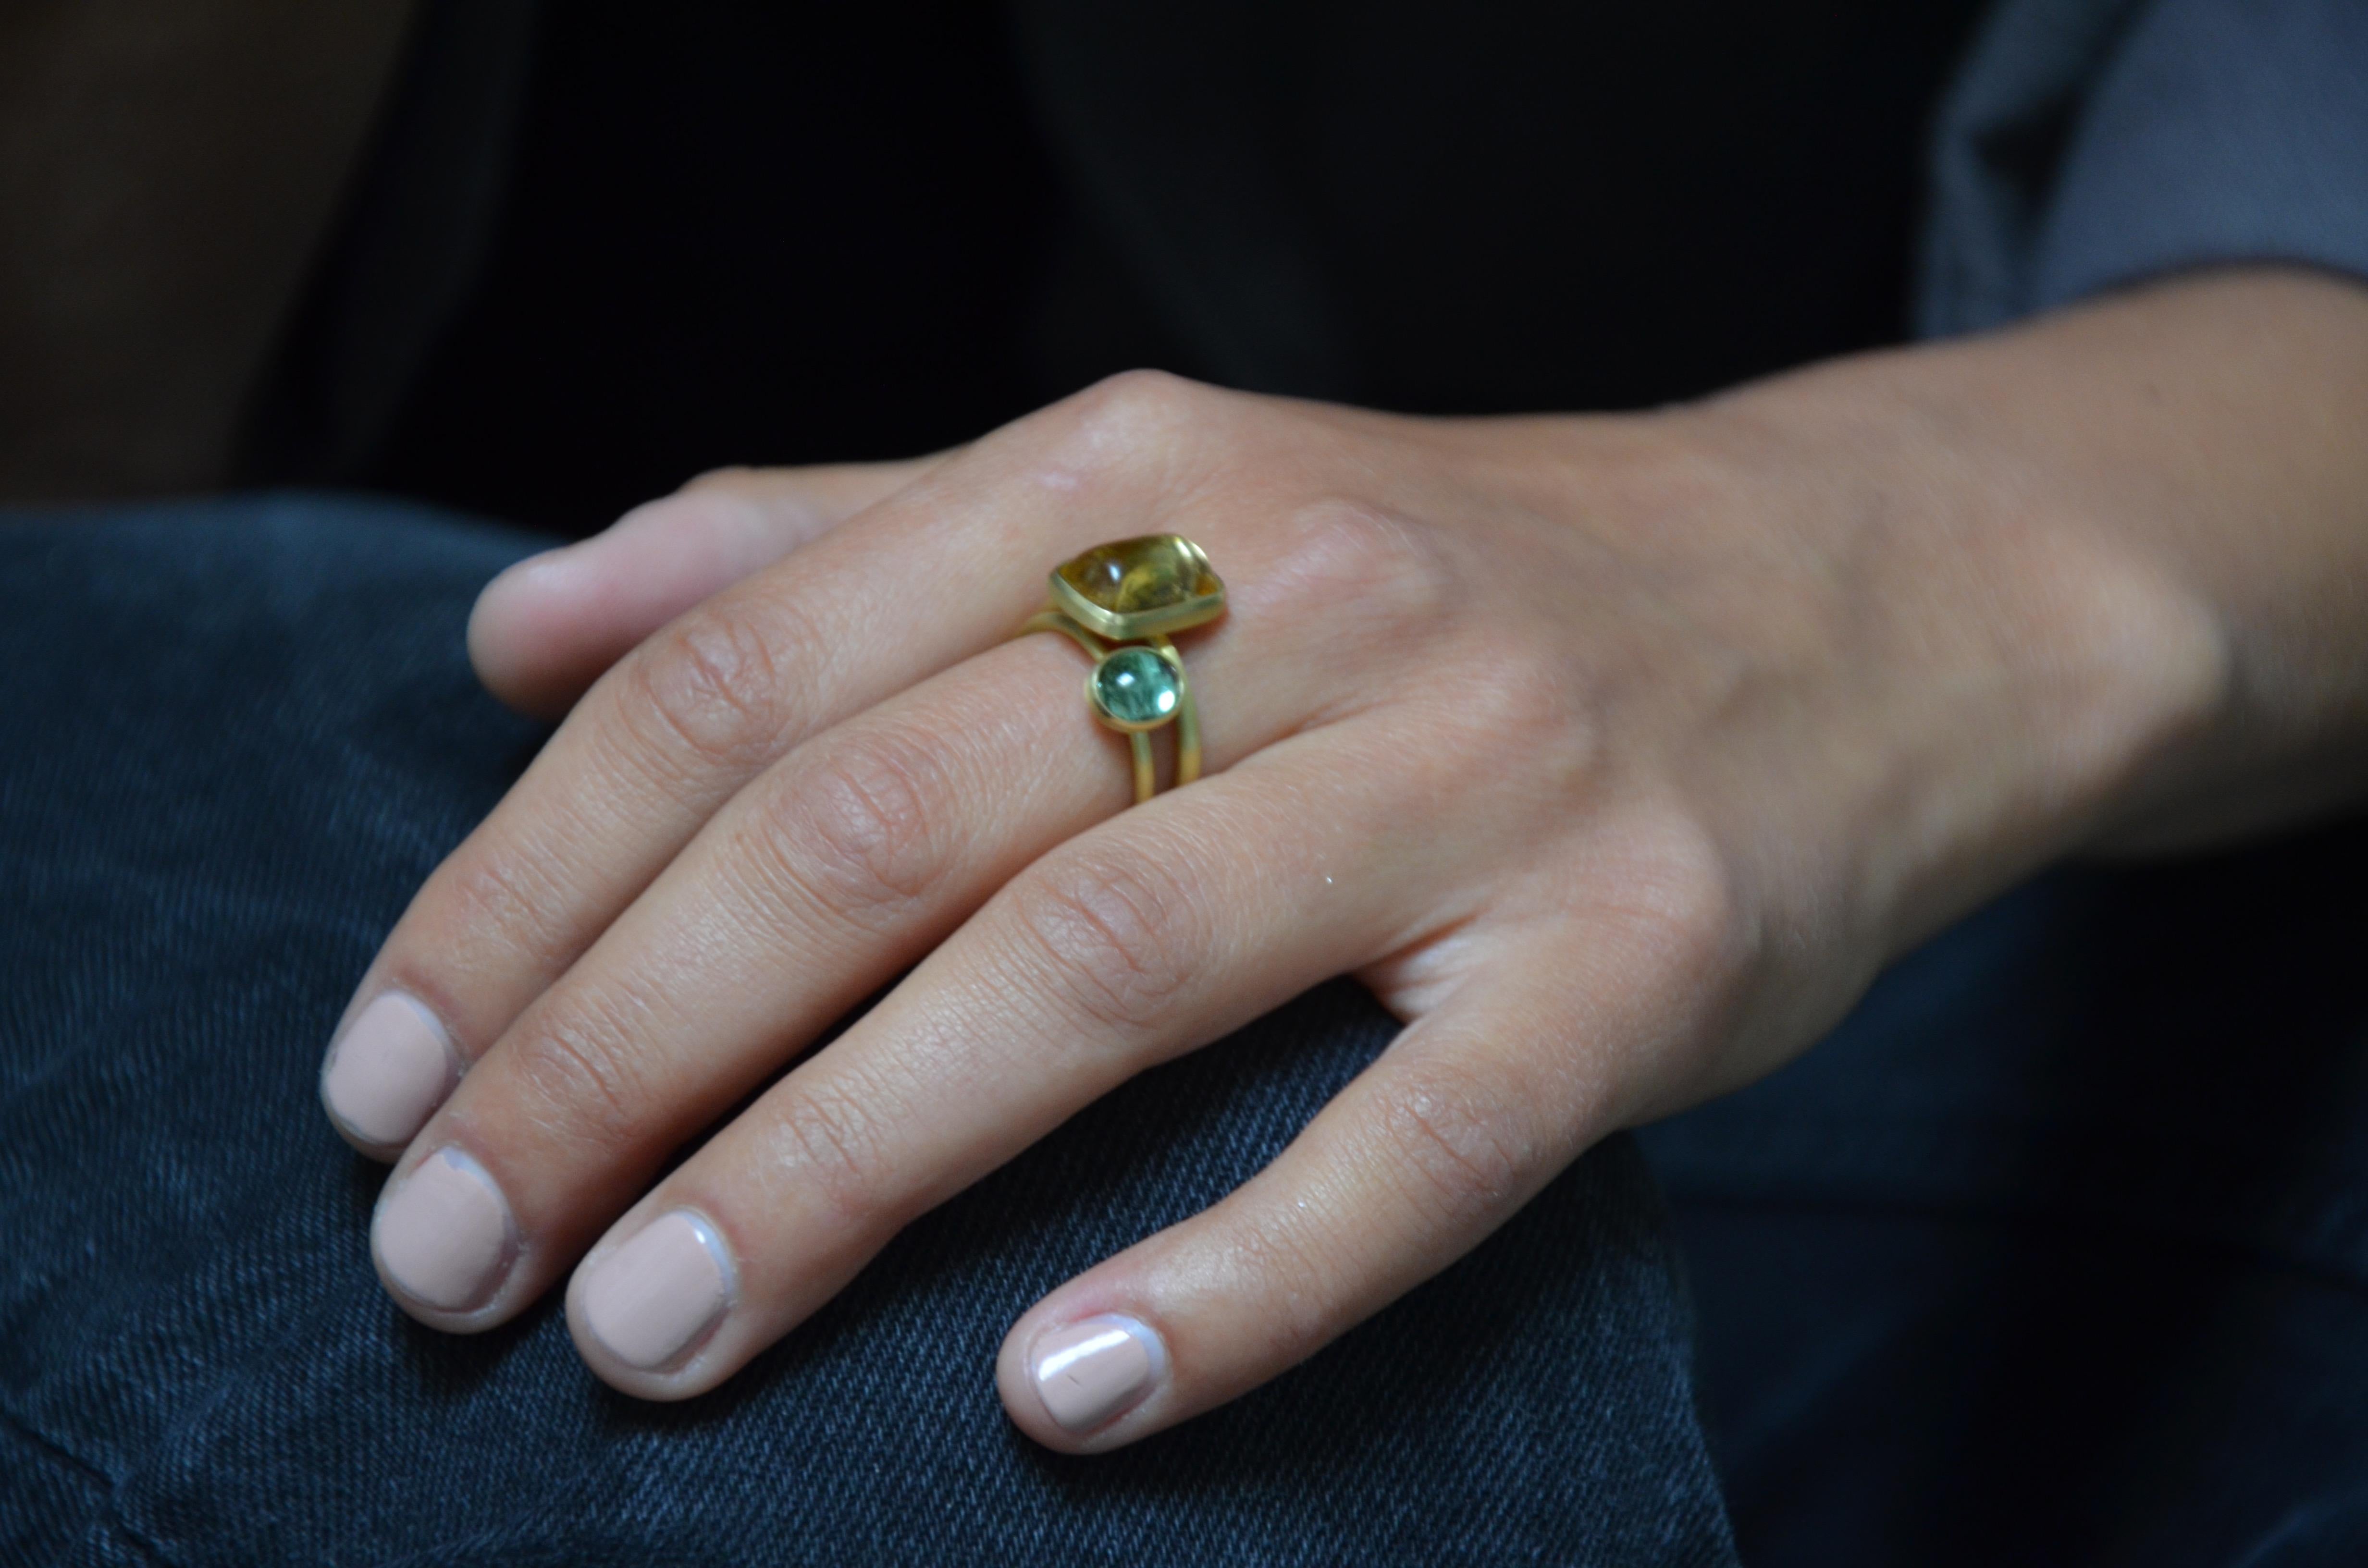 Contemporary Tourmaline 18 karat Gold Cocktail Ring

Minimalist, modern, elegant - handcrafted in our atelier, designed by Lea Schneider.
Unique in its wavey, organic shape this golden ring holds a shiny rose tourmaline. 
Through light hitting the